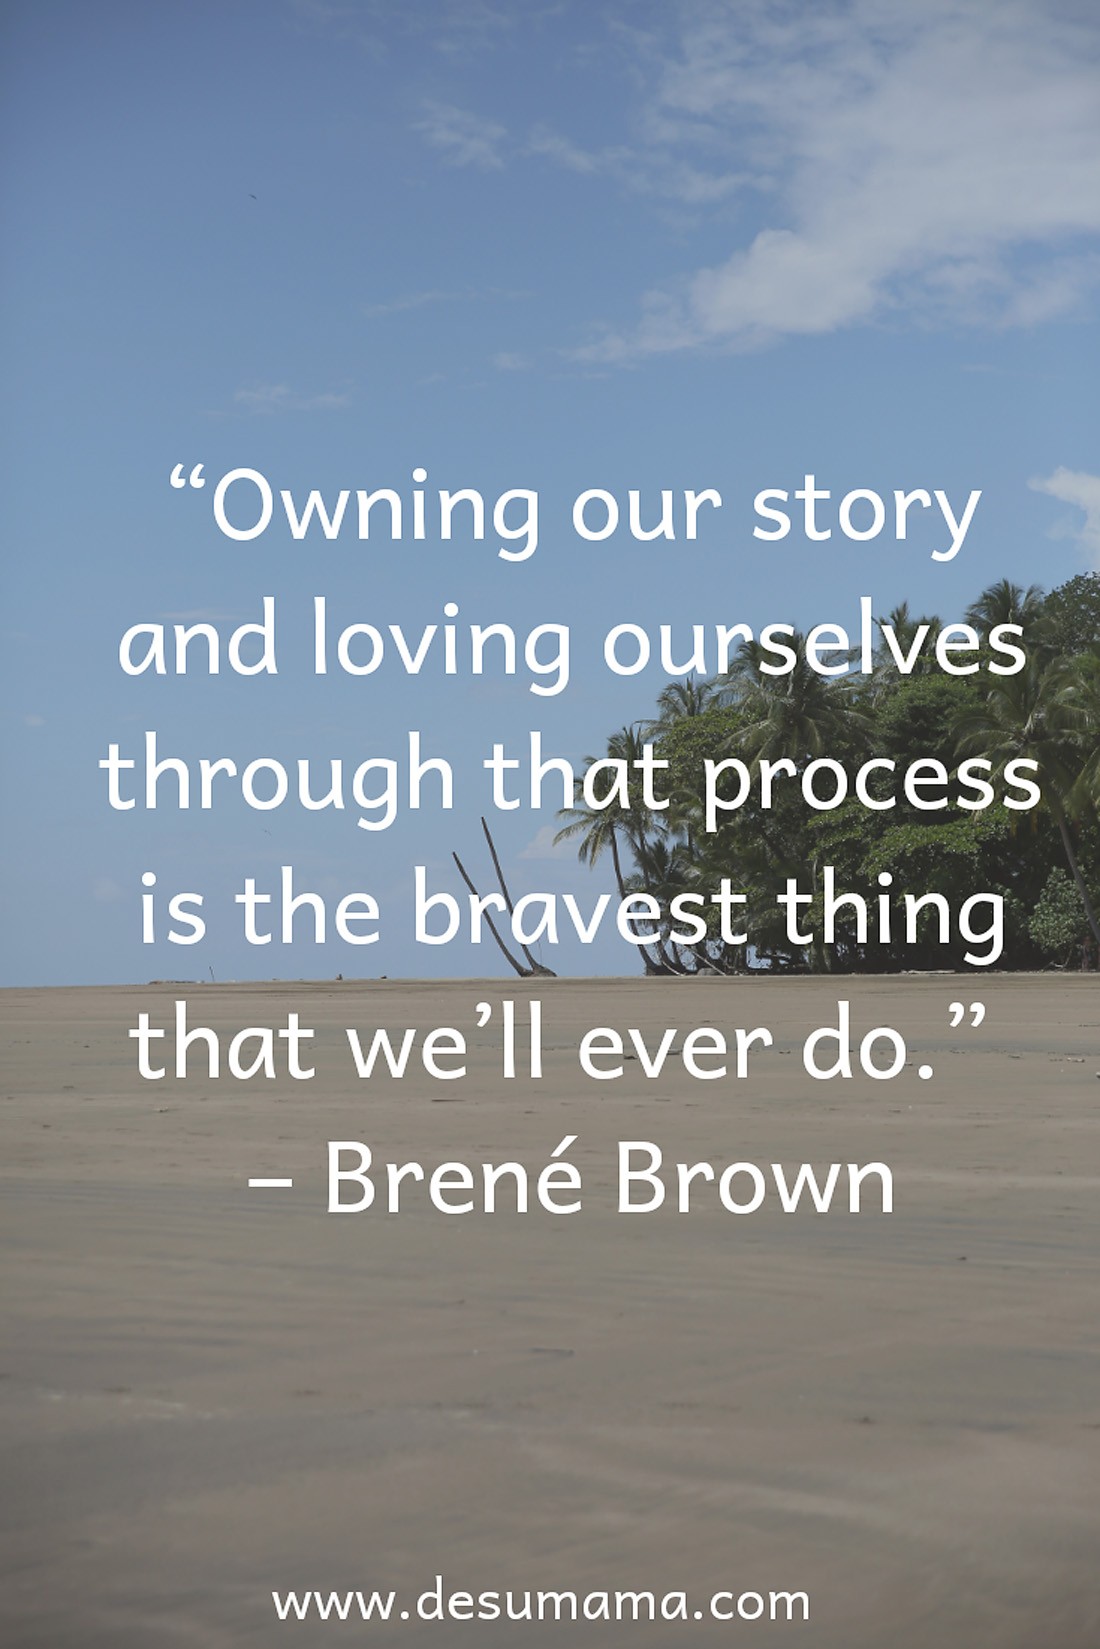 speech on confidence, brene brown quotes, quotes on self confidence